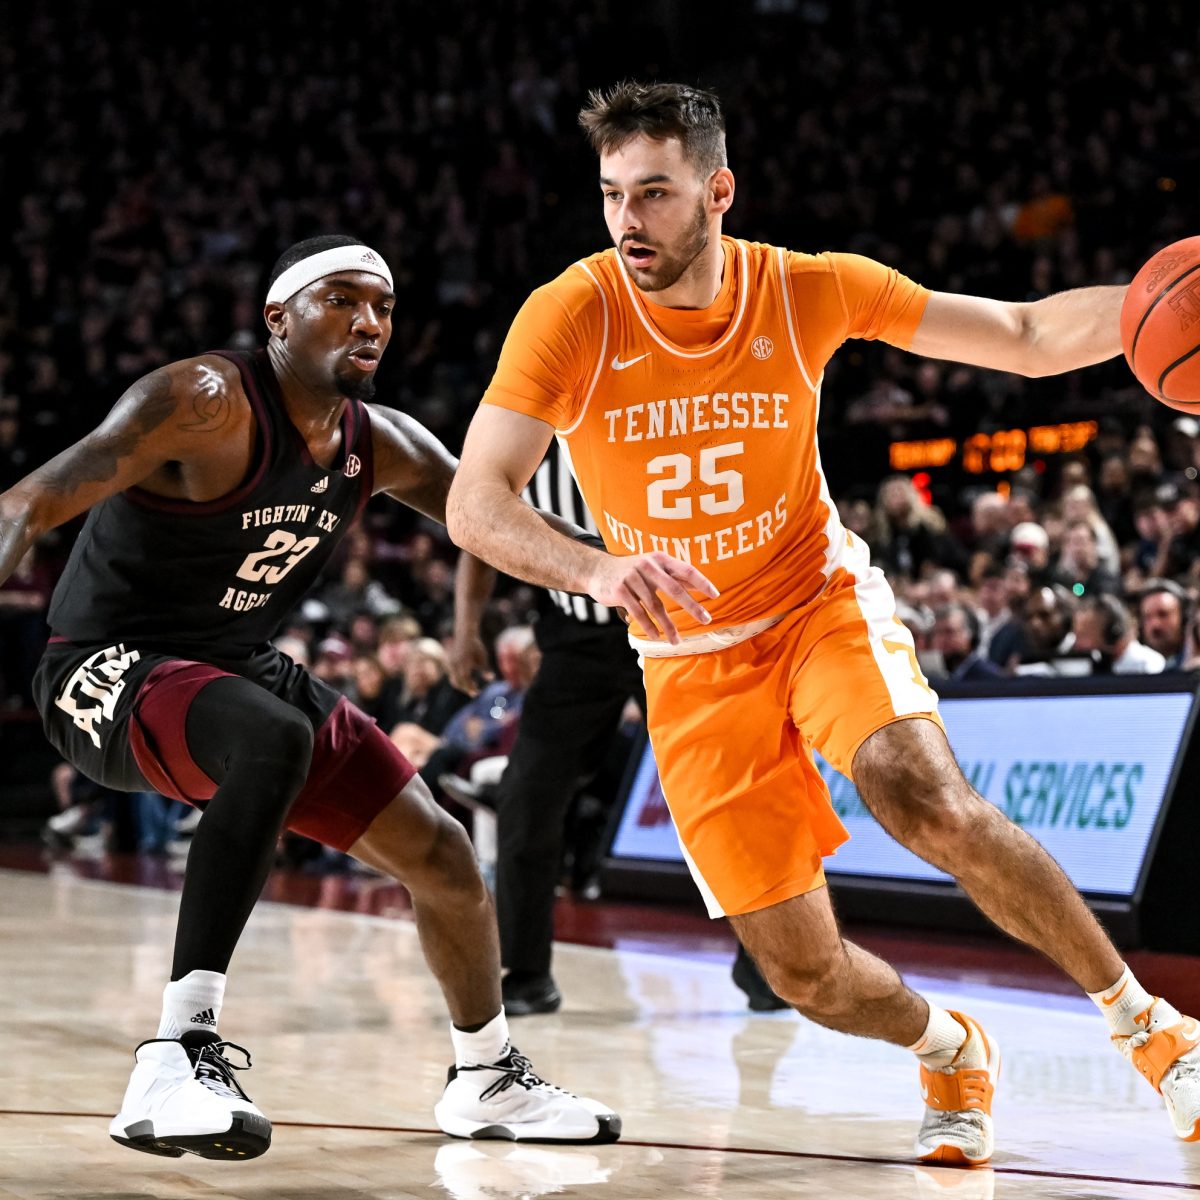 South Carolina vs. Tennessee Prediction, Preview, and Odds - 2-25-2023